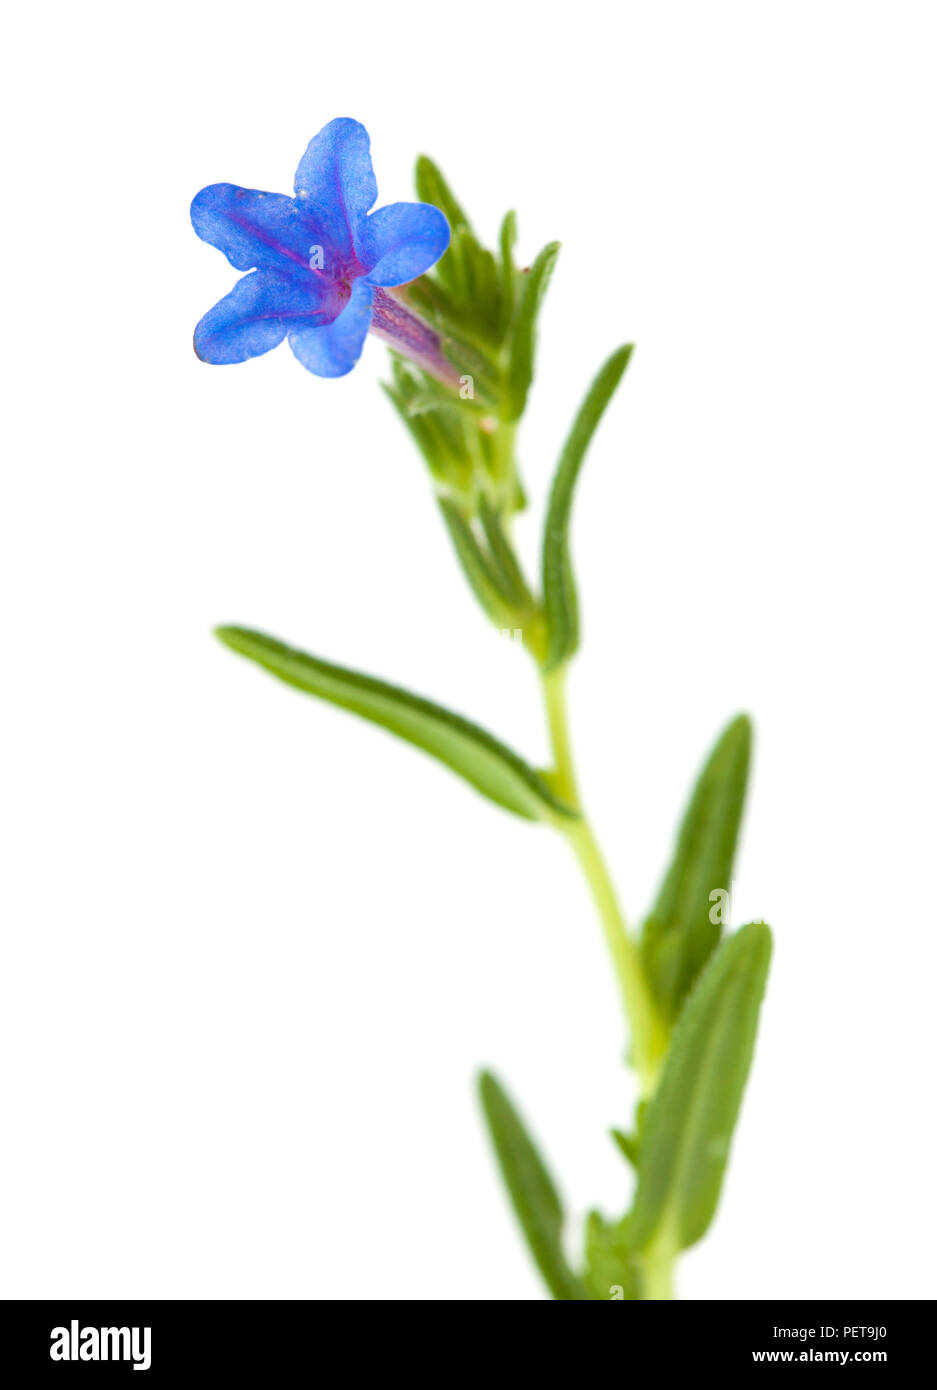 Flora of Cantabria - Lithodora diffusa, purple gromwell,  isolated on white Stock Photo